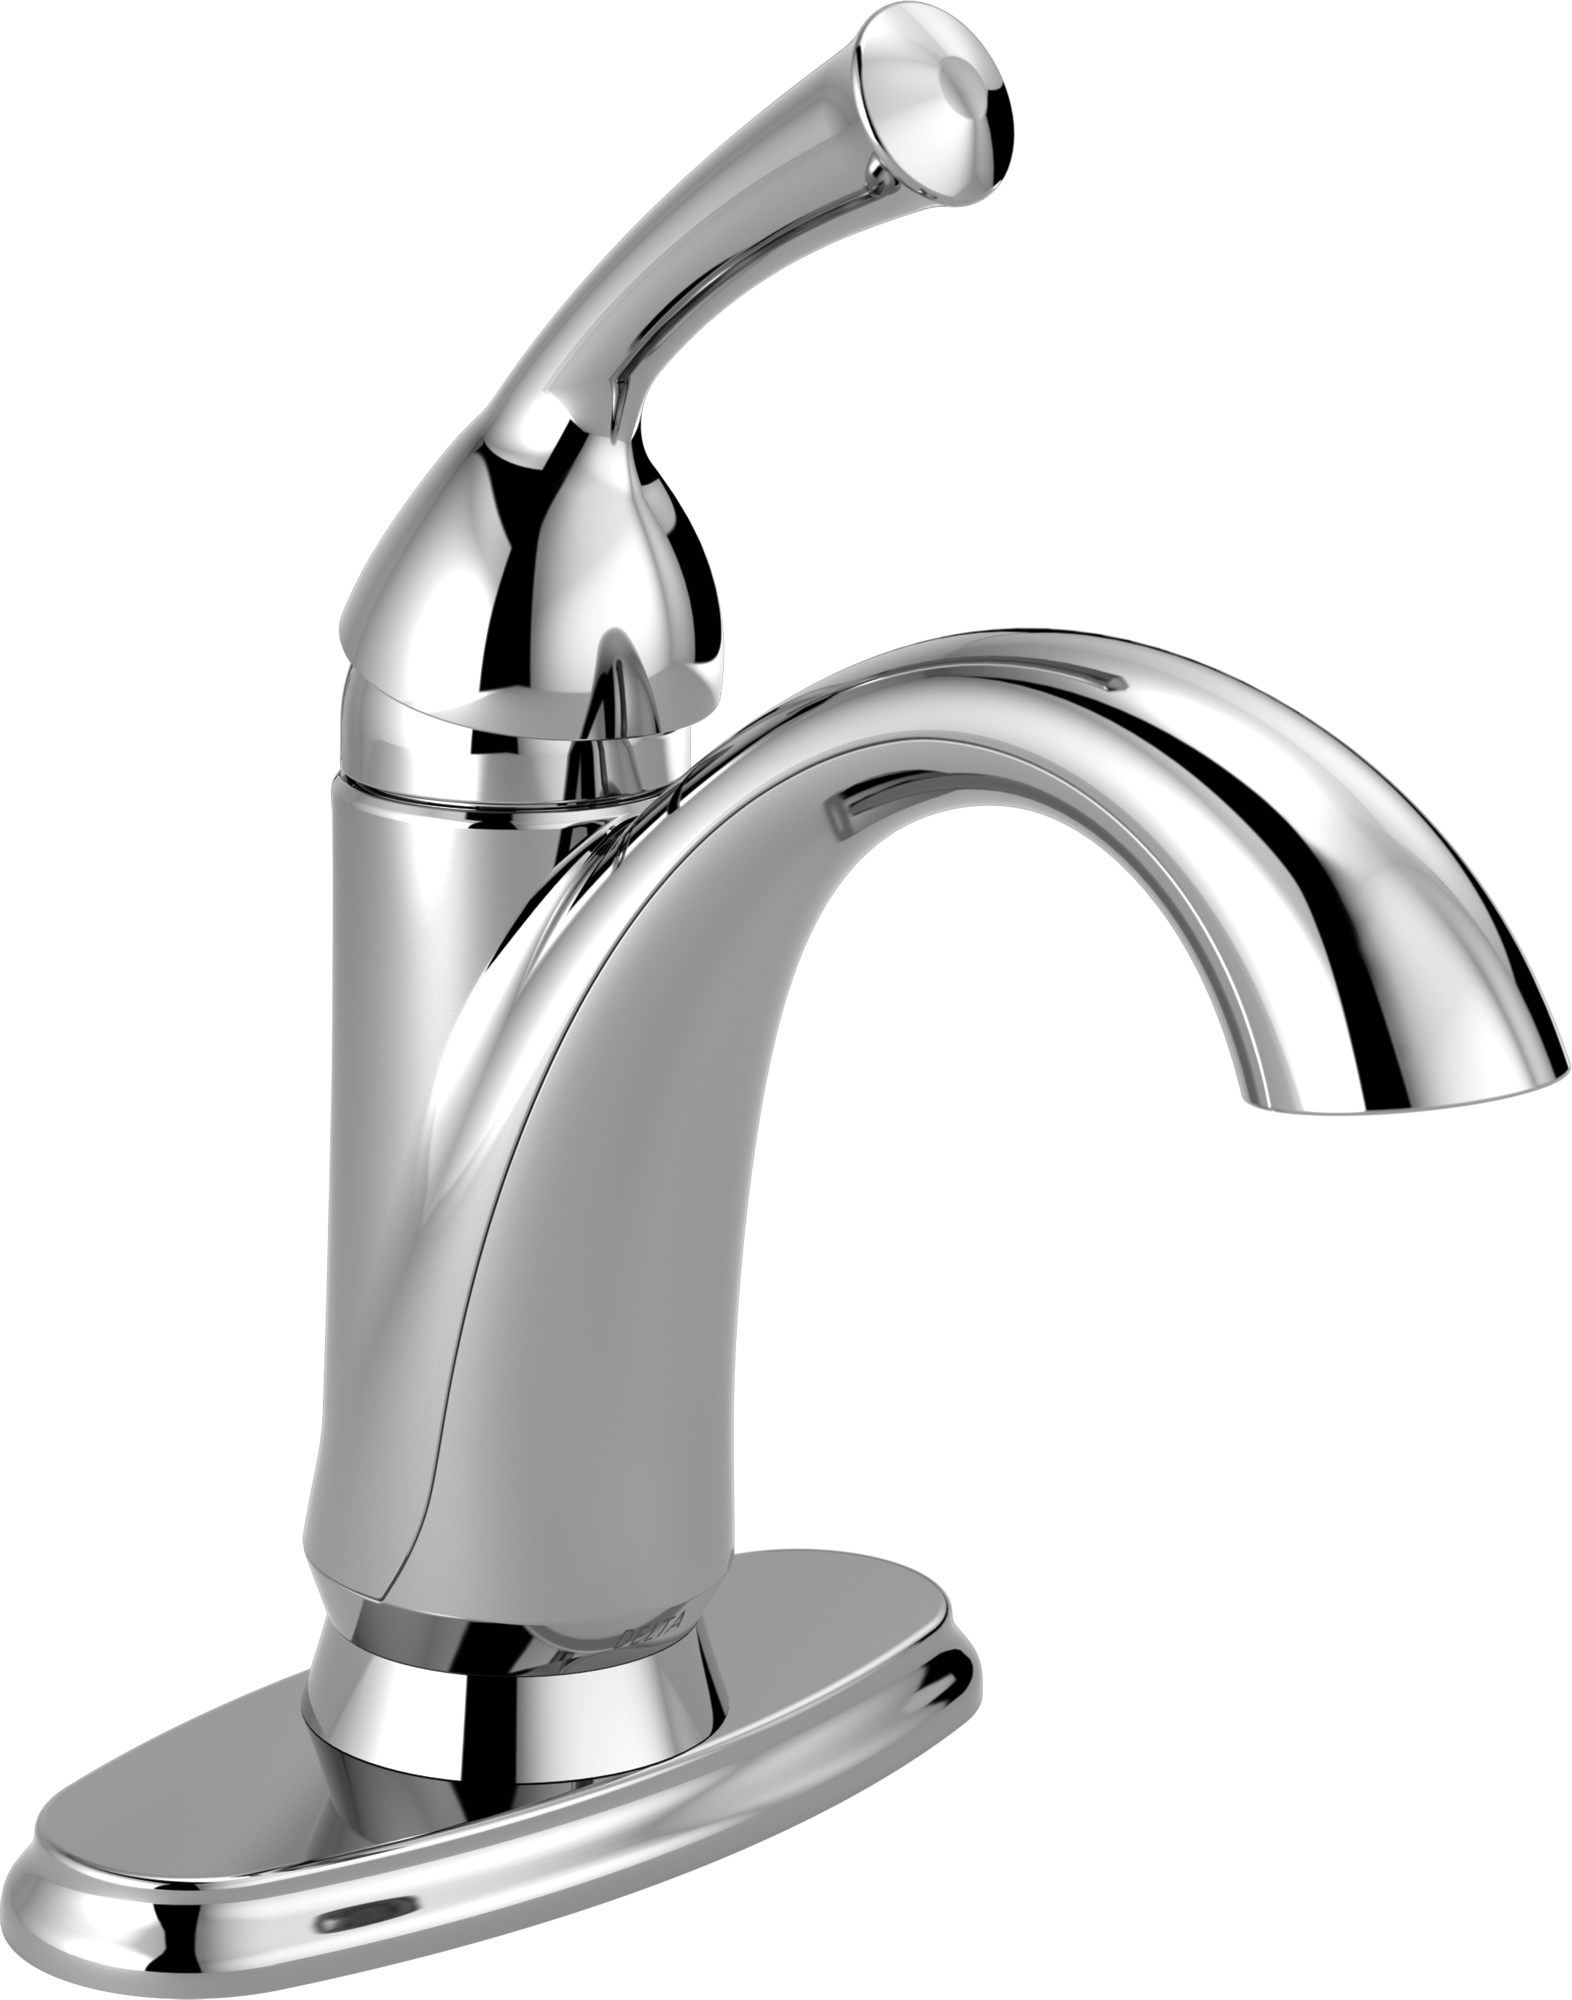 Haywood Single Hole Single-Handle Bathroom Faucet in Stainless by Delta 